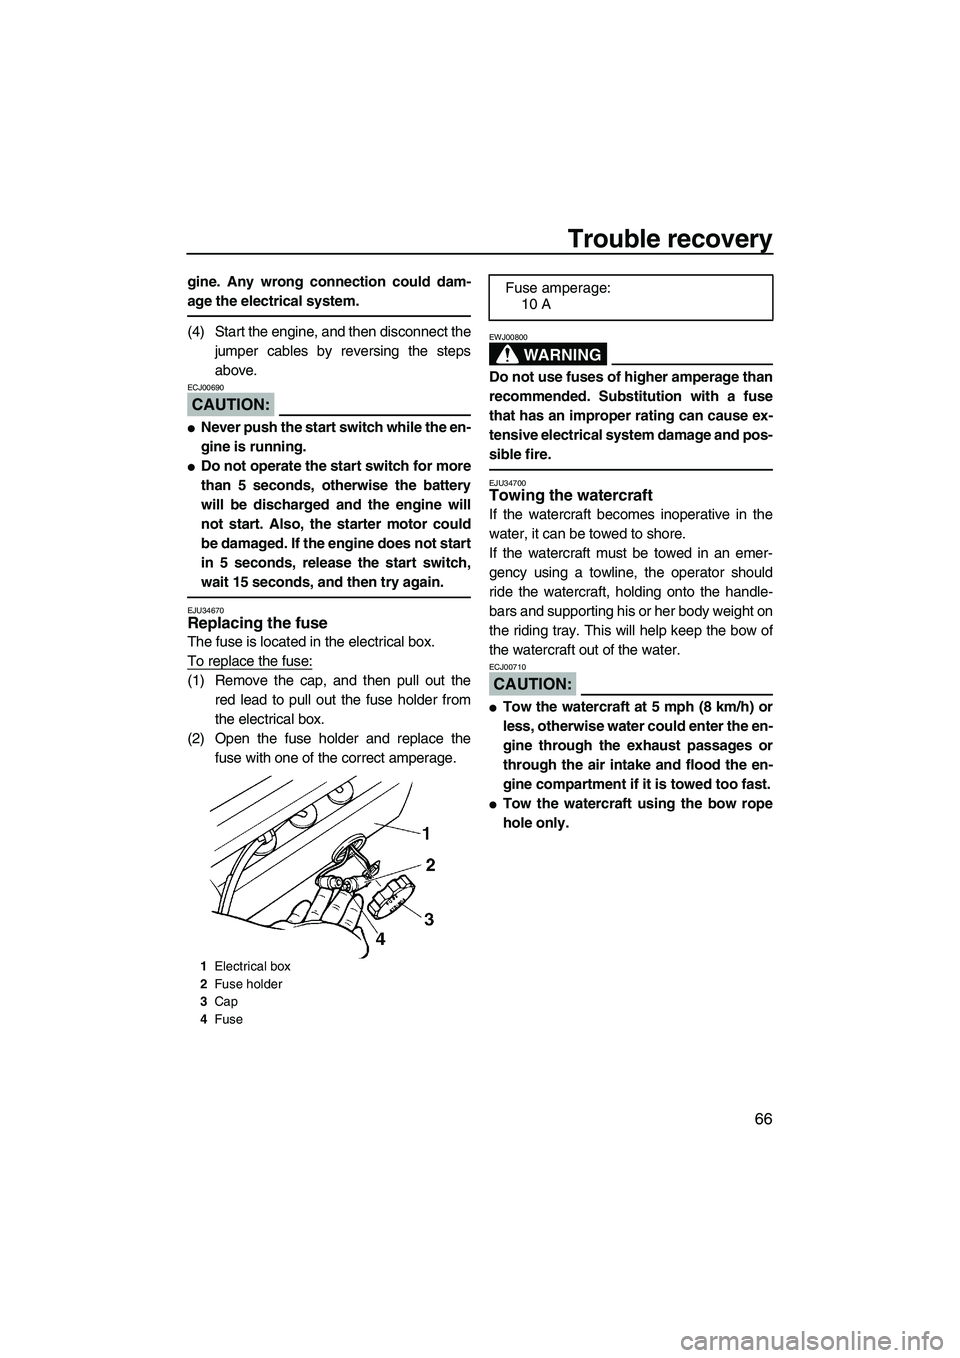 YAMAHA SUPERJET 2007 Manual PDF Trouble recovery
66
gine. Any wrong connection could dam-
age the electrical system.
(4) Start the engine, and then disconnect the
jumper cables by reversing the steps
above.
CAUTION:
ECJ00690
Never 